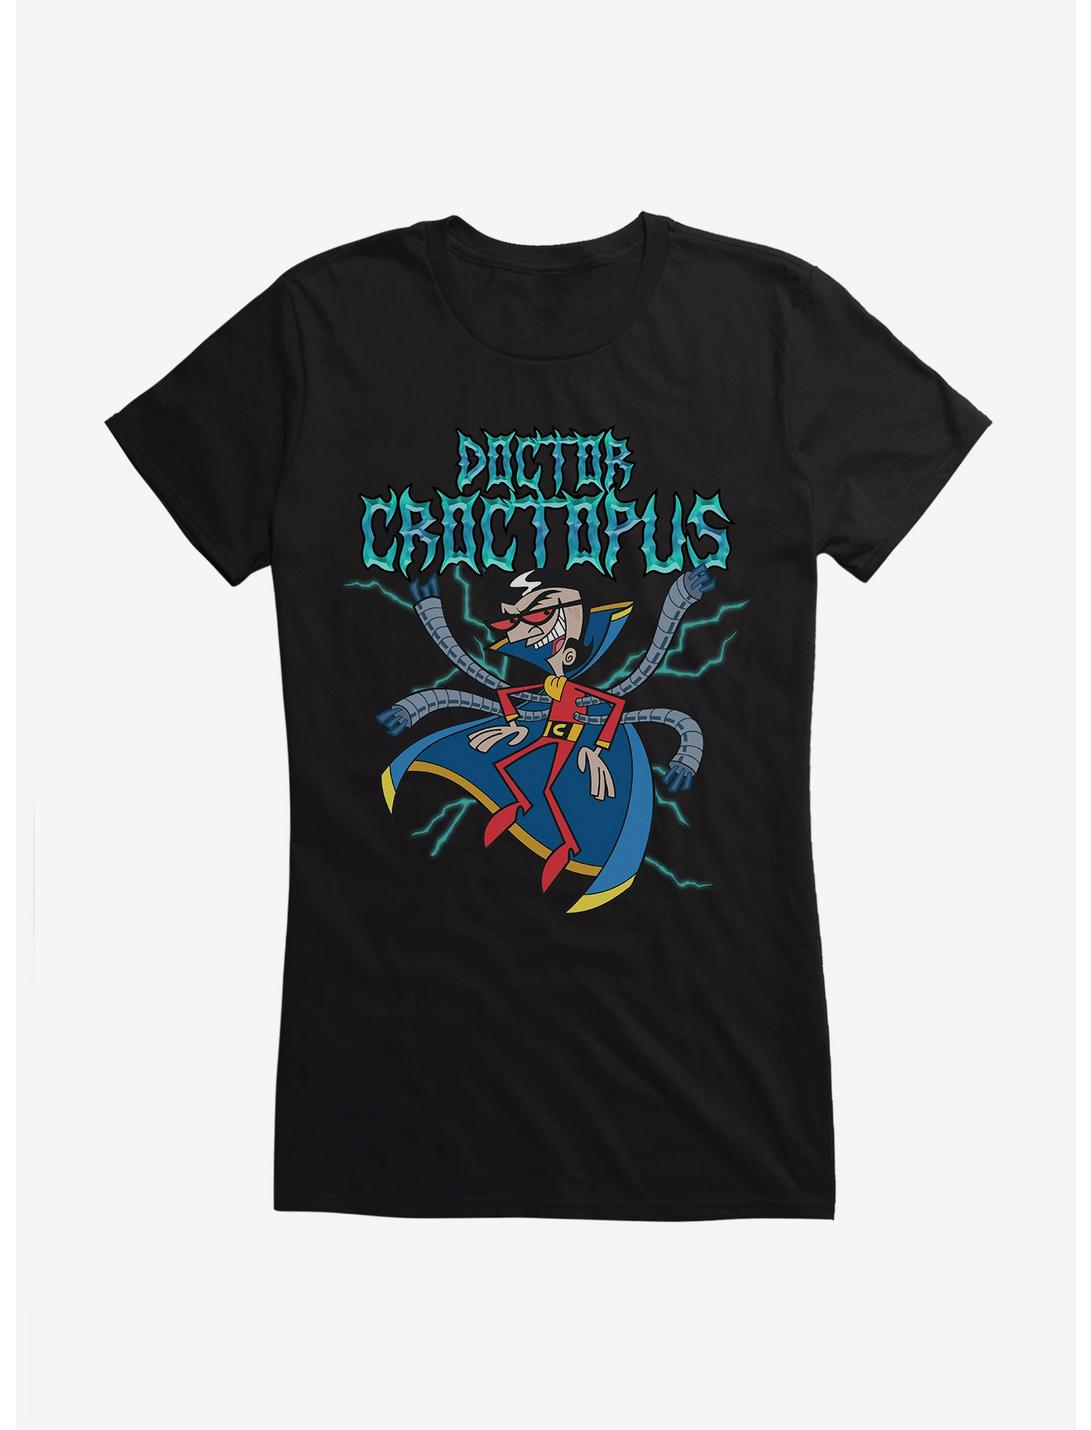 The Fairly Oddparents Doctor Croctopus Girls T-Shirt, BLACK, hi-res